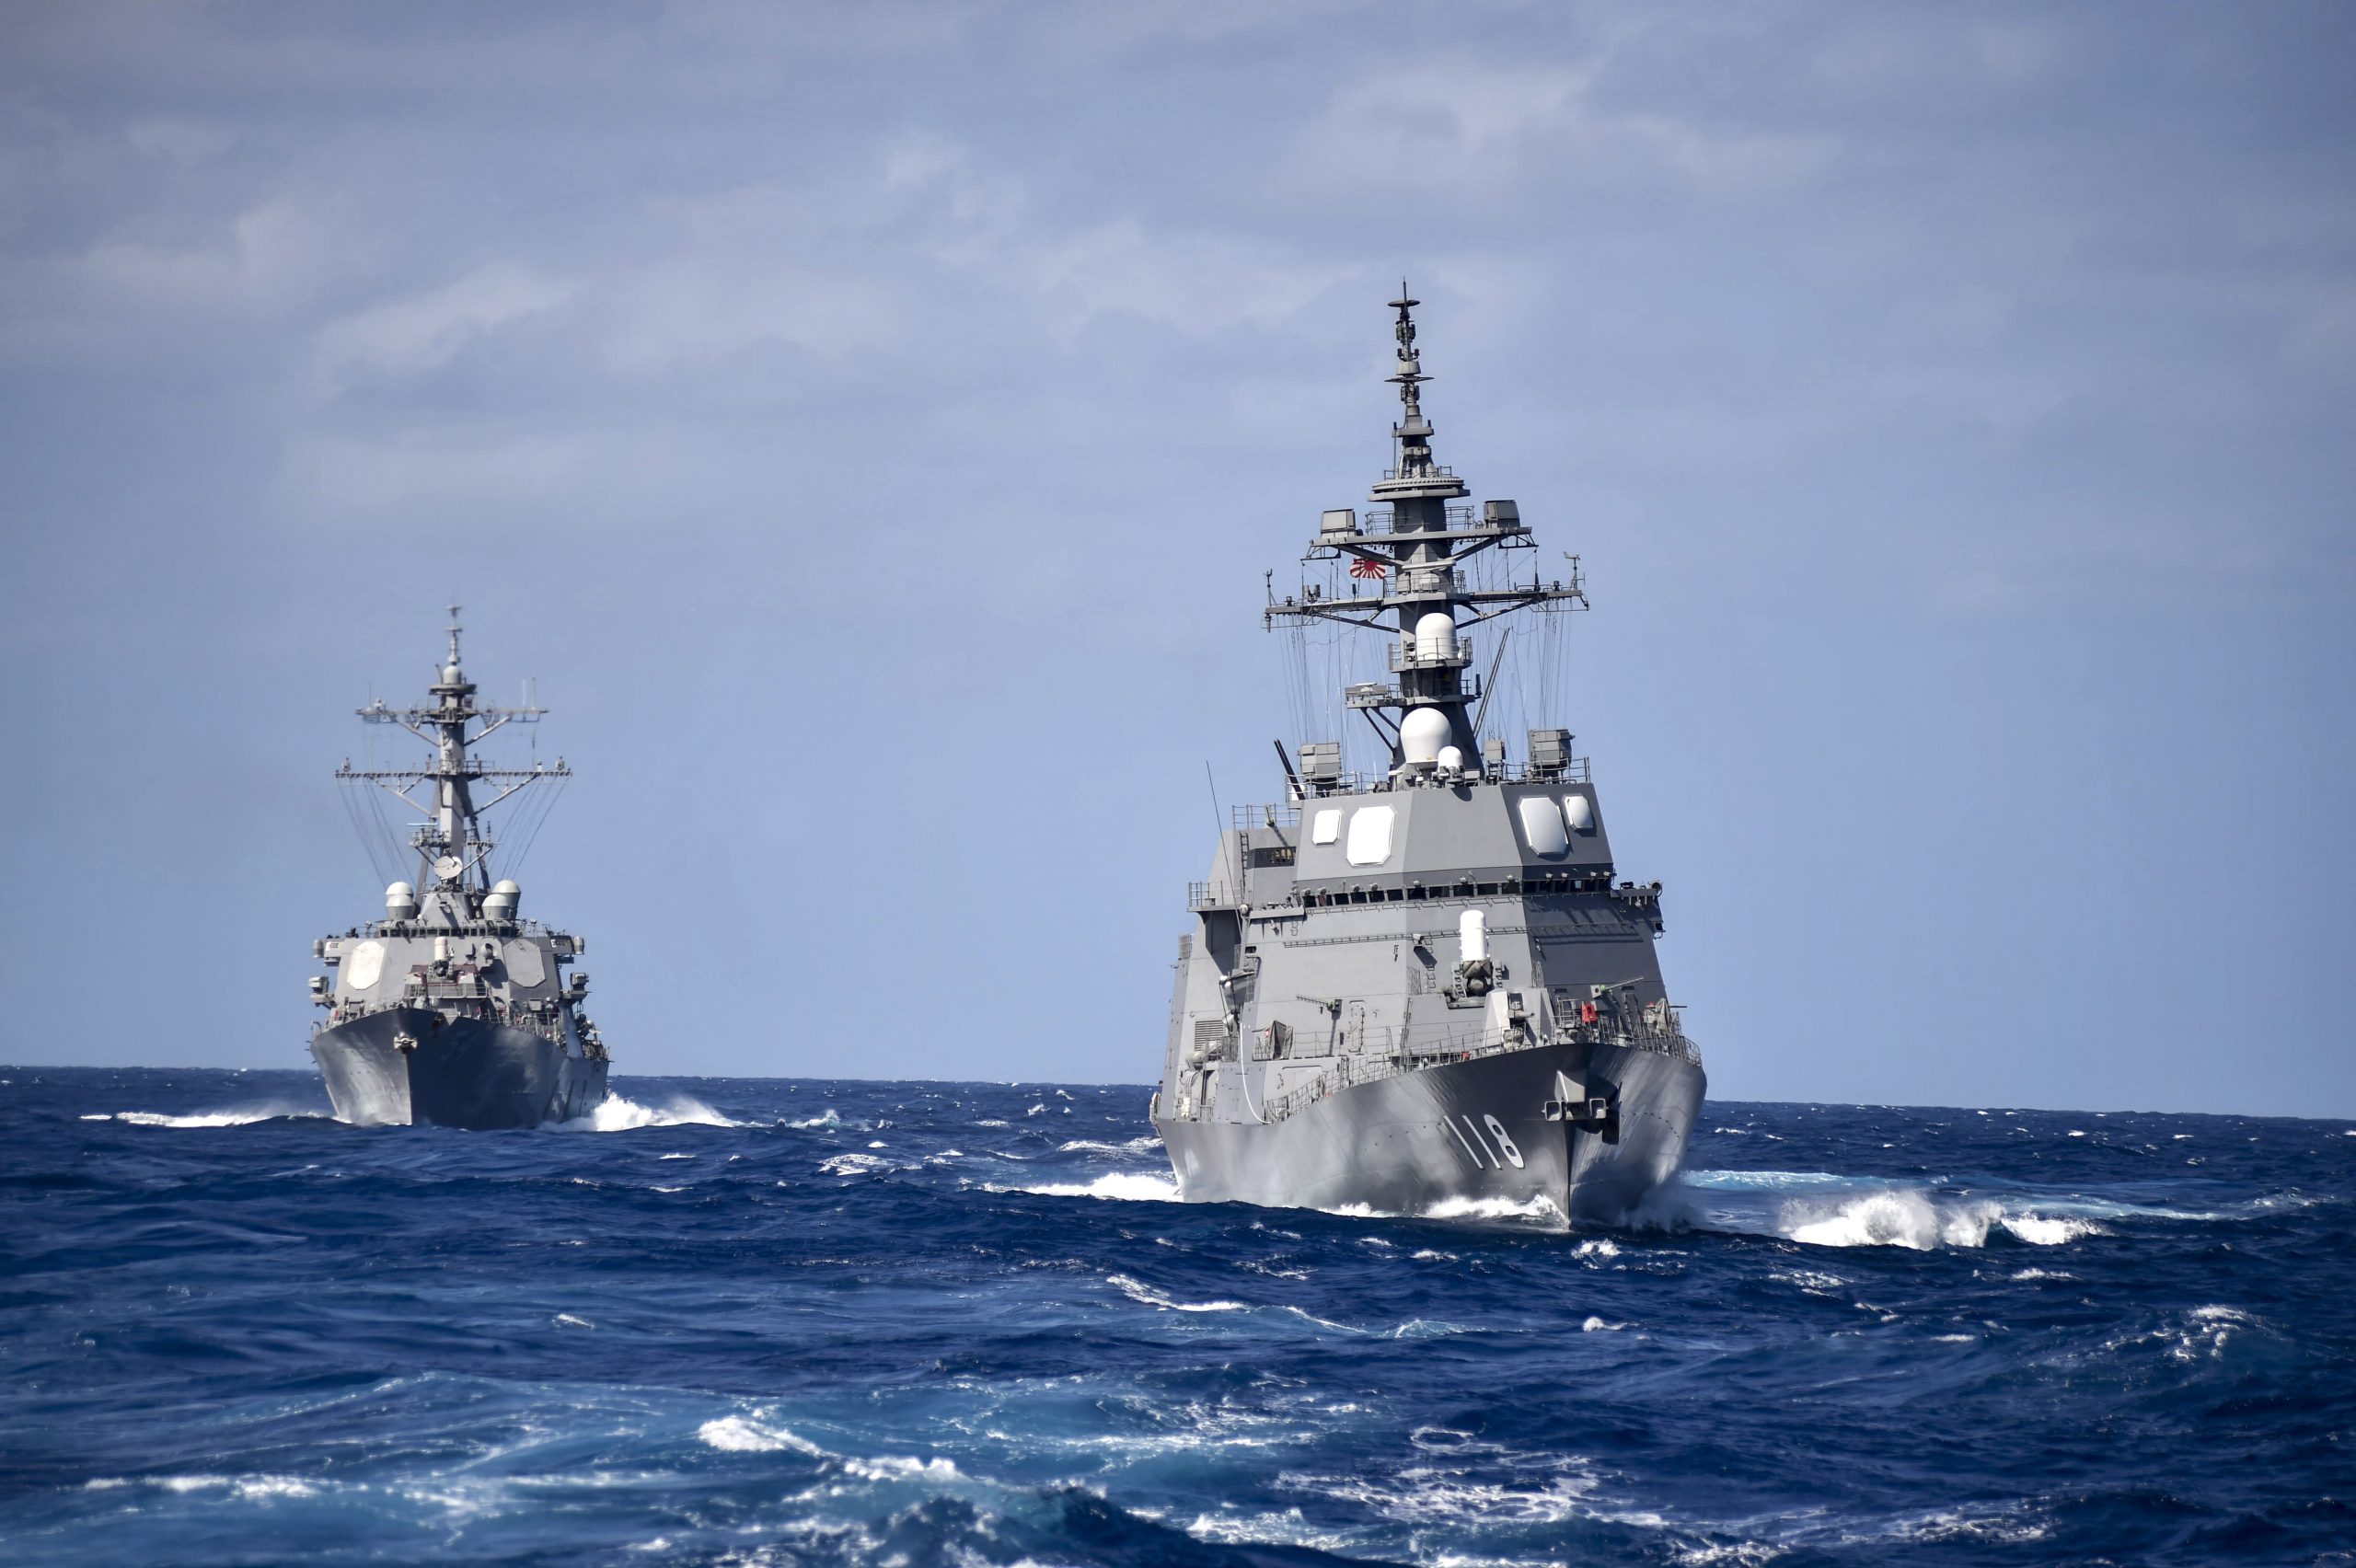 Philippine Sea(Feb. 28, 2018) The Arleigh Burke-class guided-missile destroyer USS Curtis Wilbur (DDG 54), left, sails in formation with the Japanese Maritime Self-Defense Force Akizuki-class destroyer JS Fuyuzuki (DD-118) during a close quarters maneuvering exercise. Curtis Wilbur is forward-deployed to the U.S. 7th Fleet area of operations in support of security and stability in the Indo-Pacific region. U.S. Navy photo by Mass Communication Specialist 1st Class Benjamin Dobbs. -